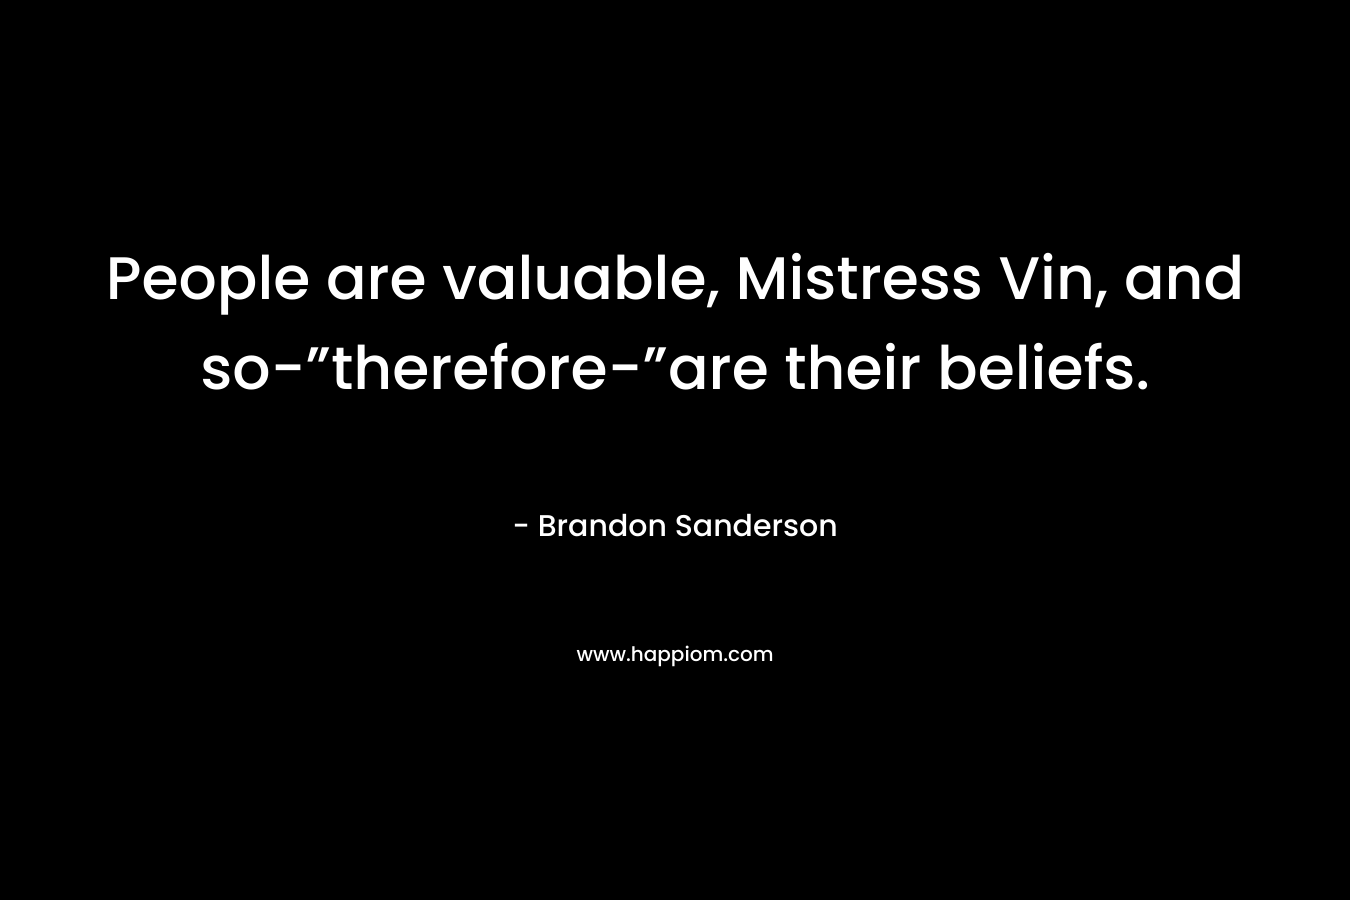 People are valuable, Mistress Vin, and so-”therefore-”are their beliefs.